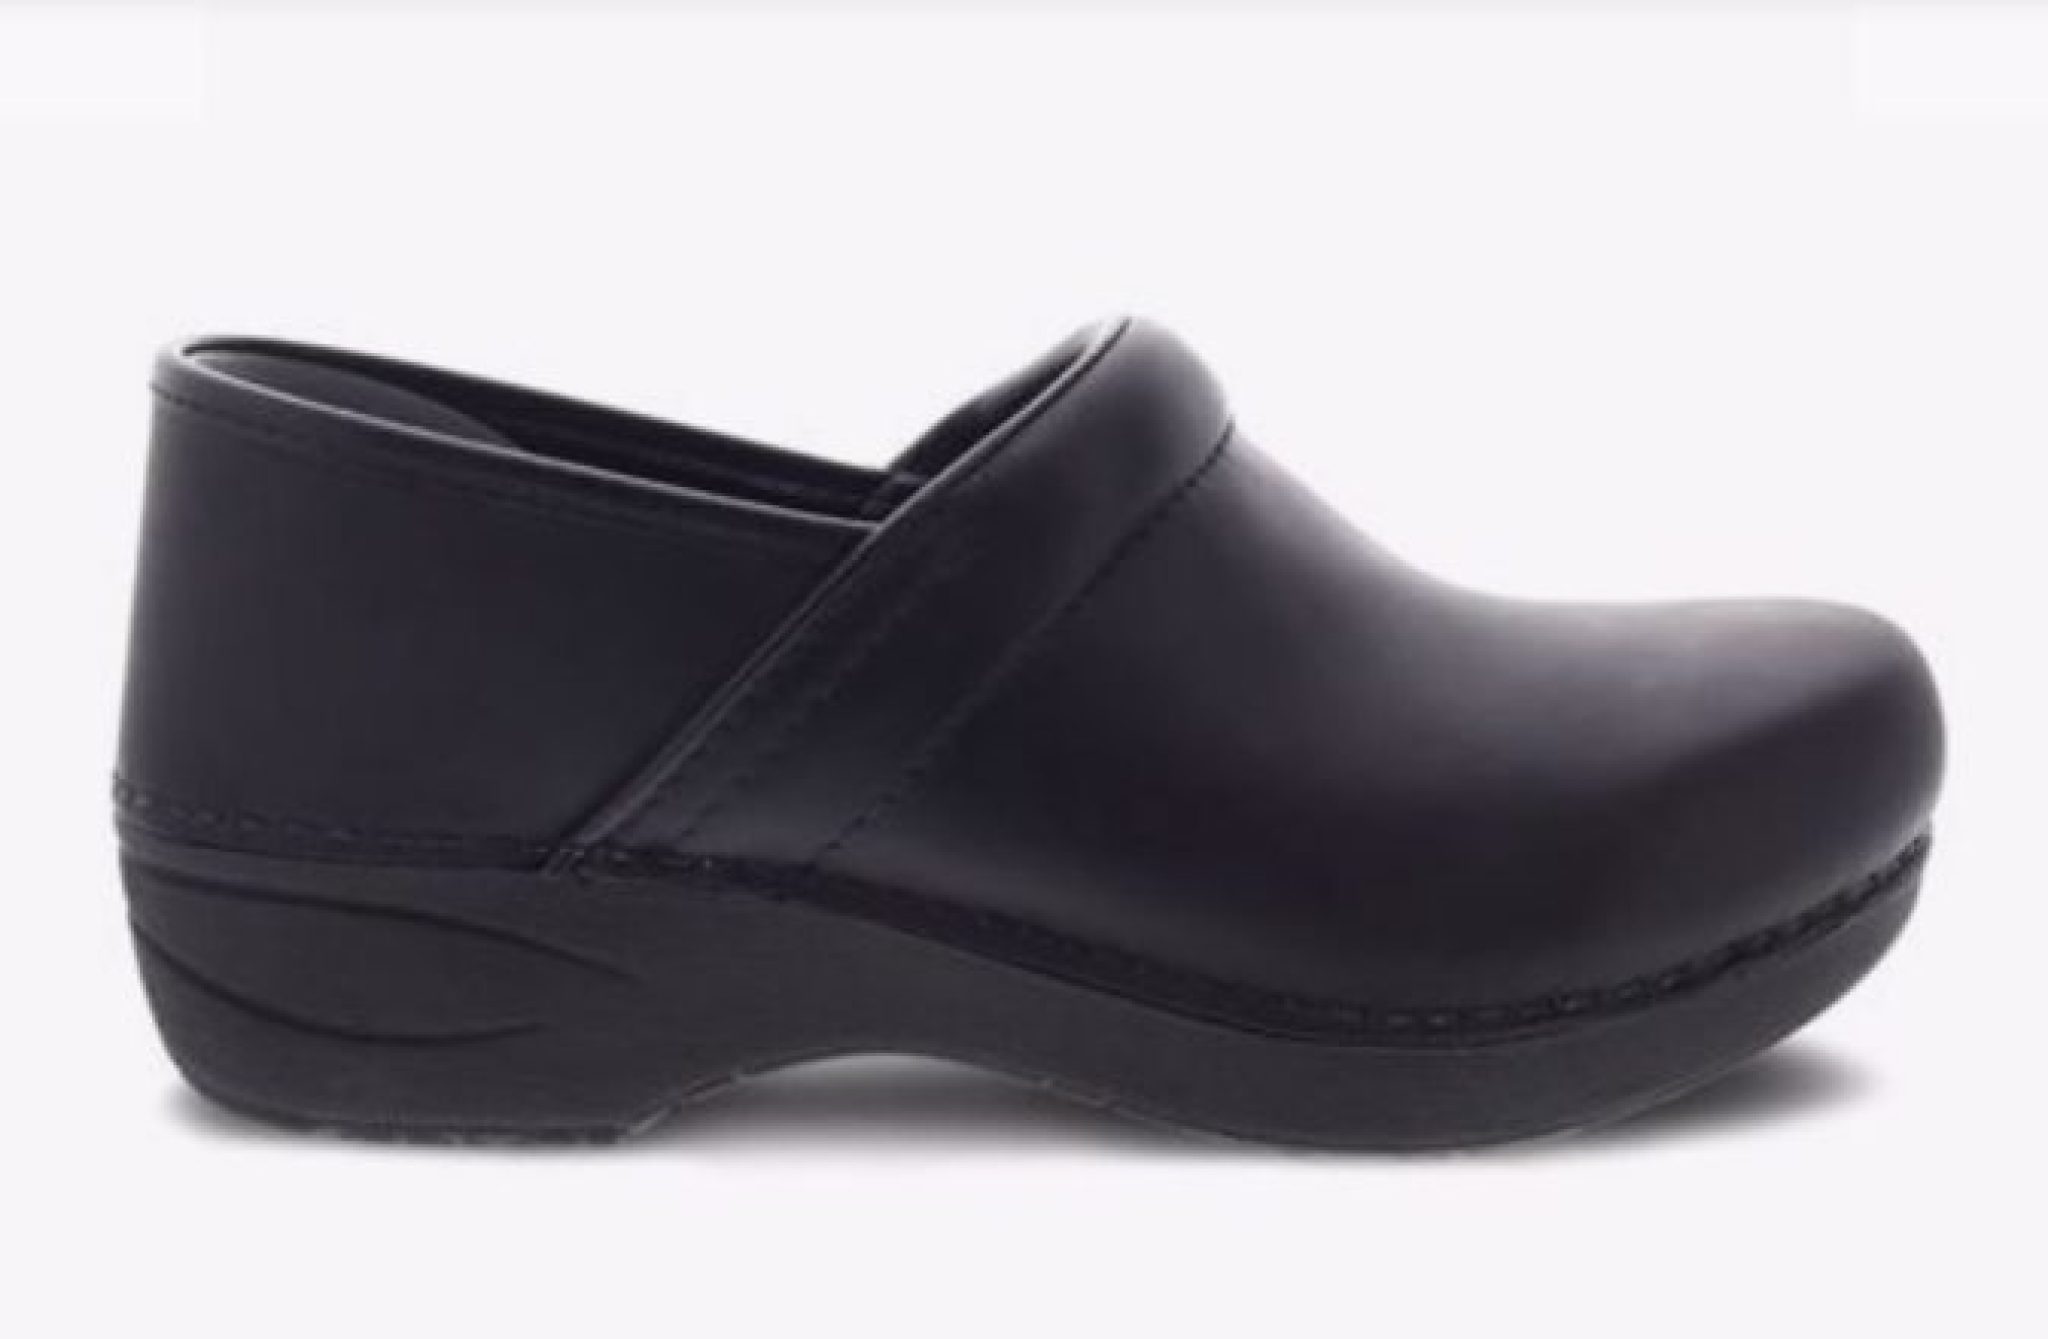 Are Dansko Shoes Good For Plantar Fasciitis? - The Shoe Box NYC